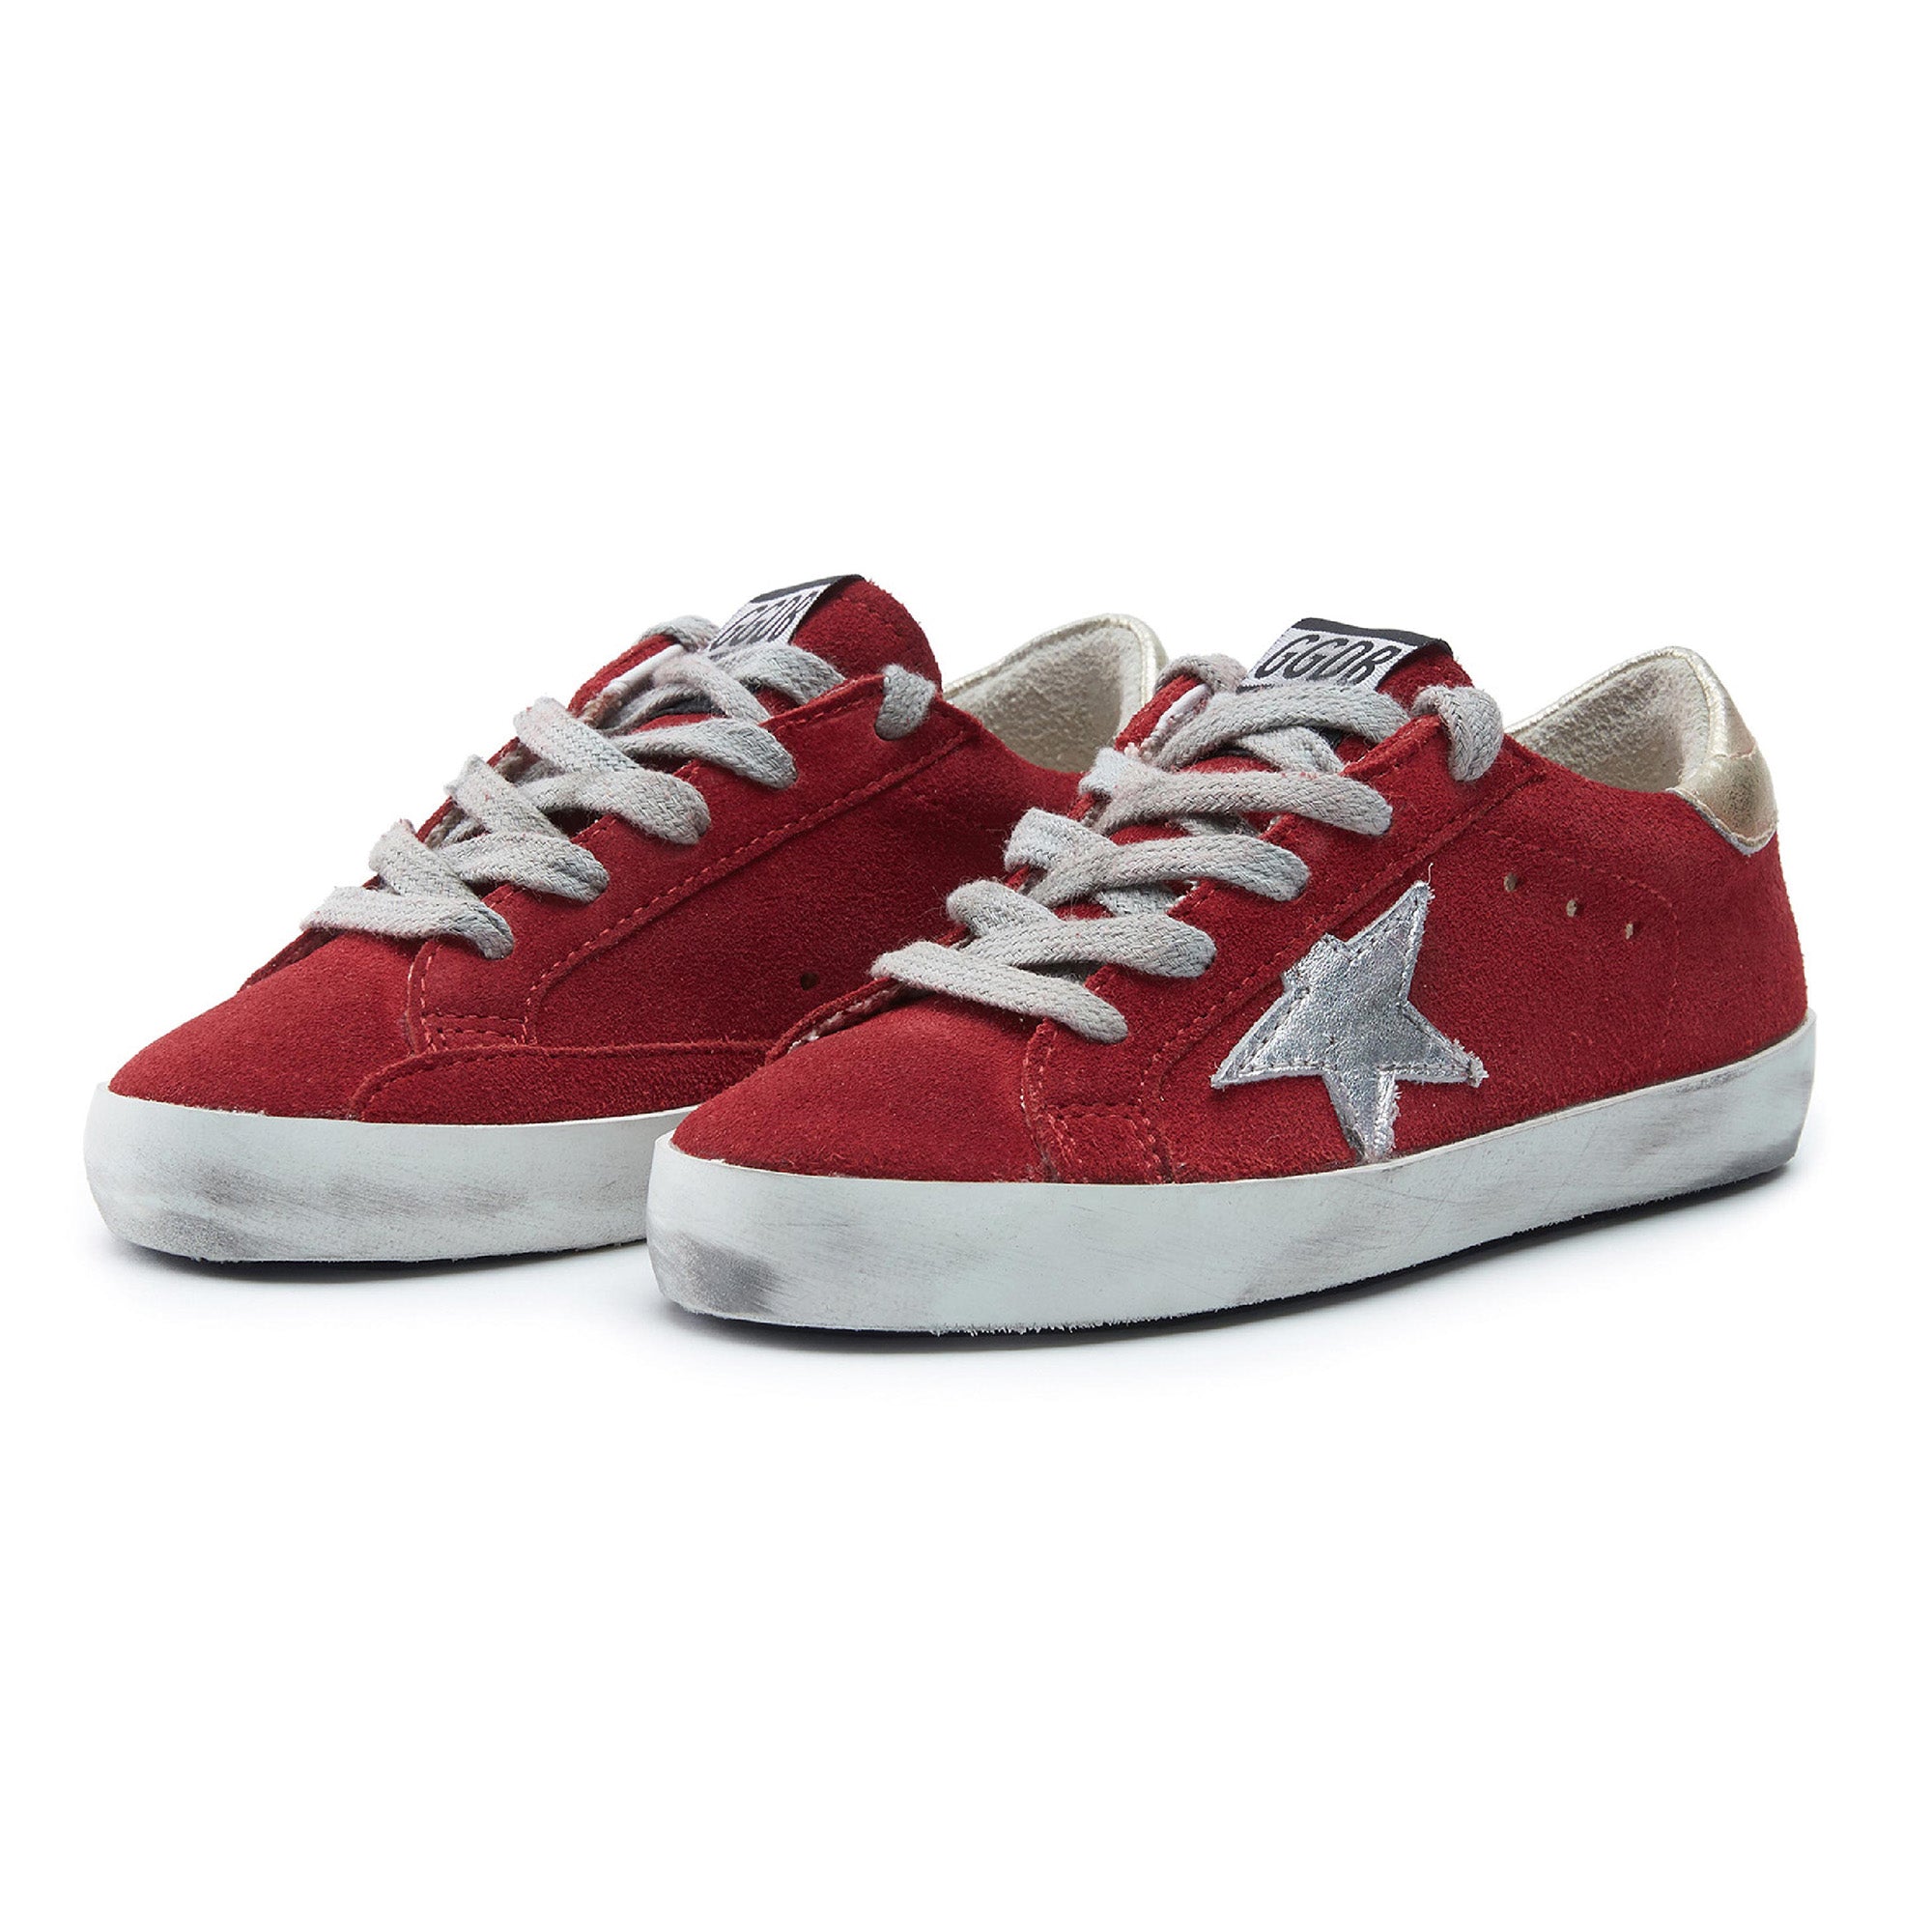 Boys & Girls Red & Silver Star Leather Shoes